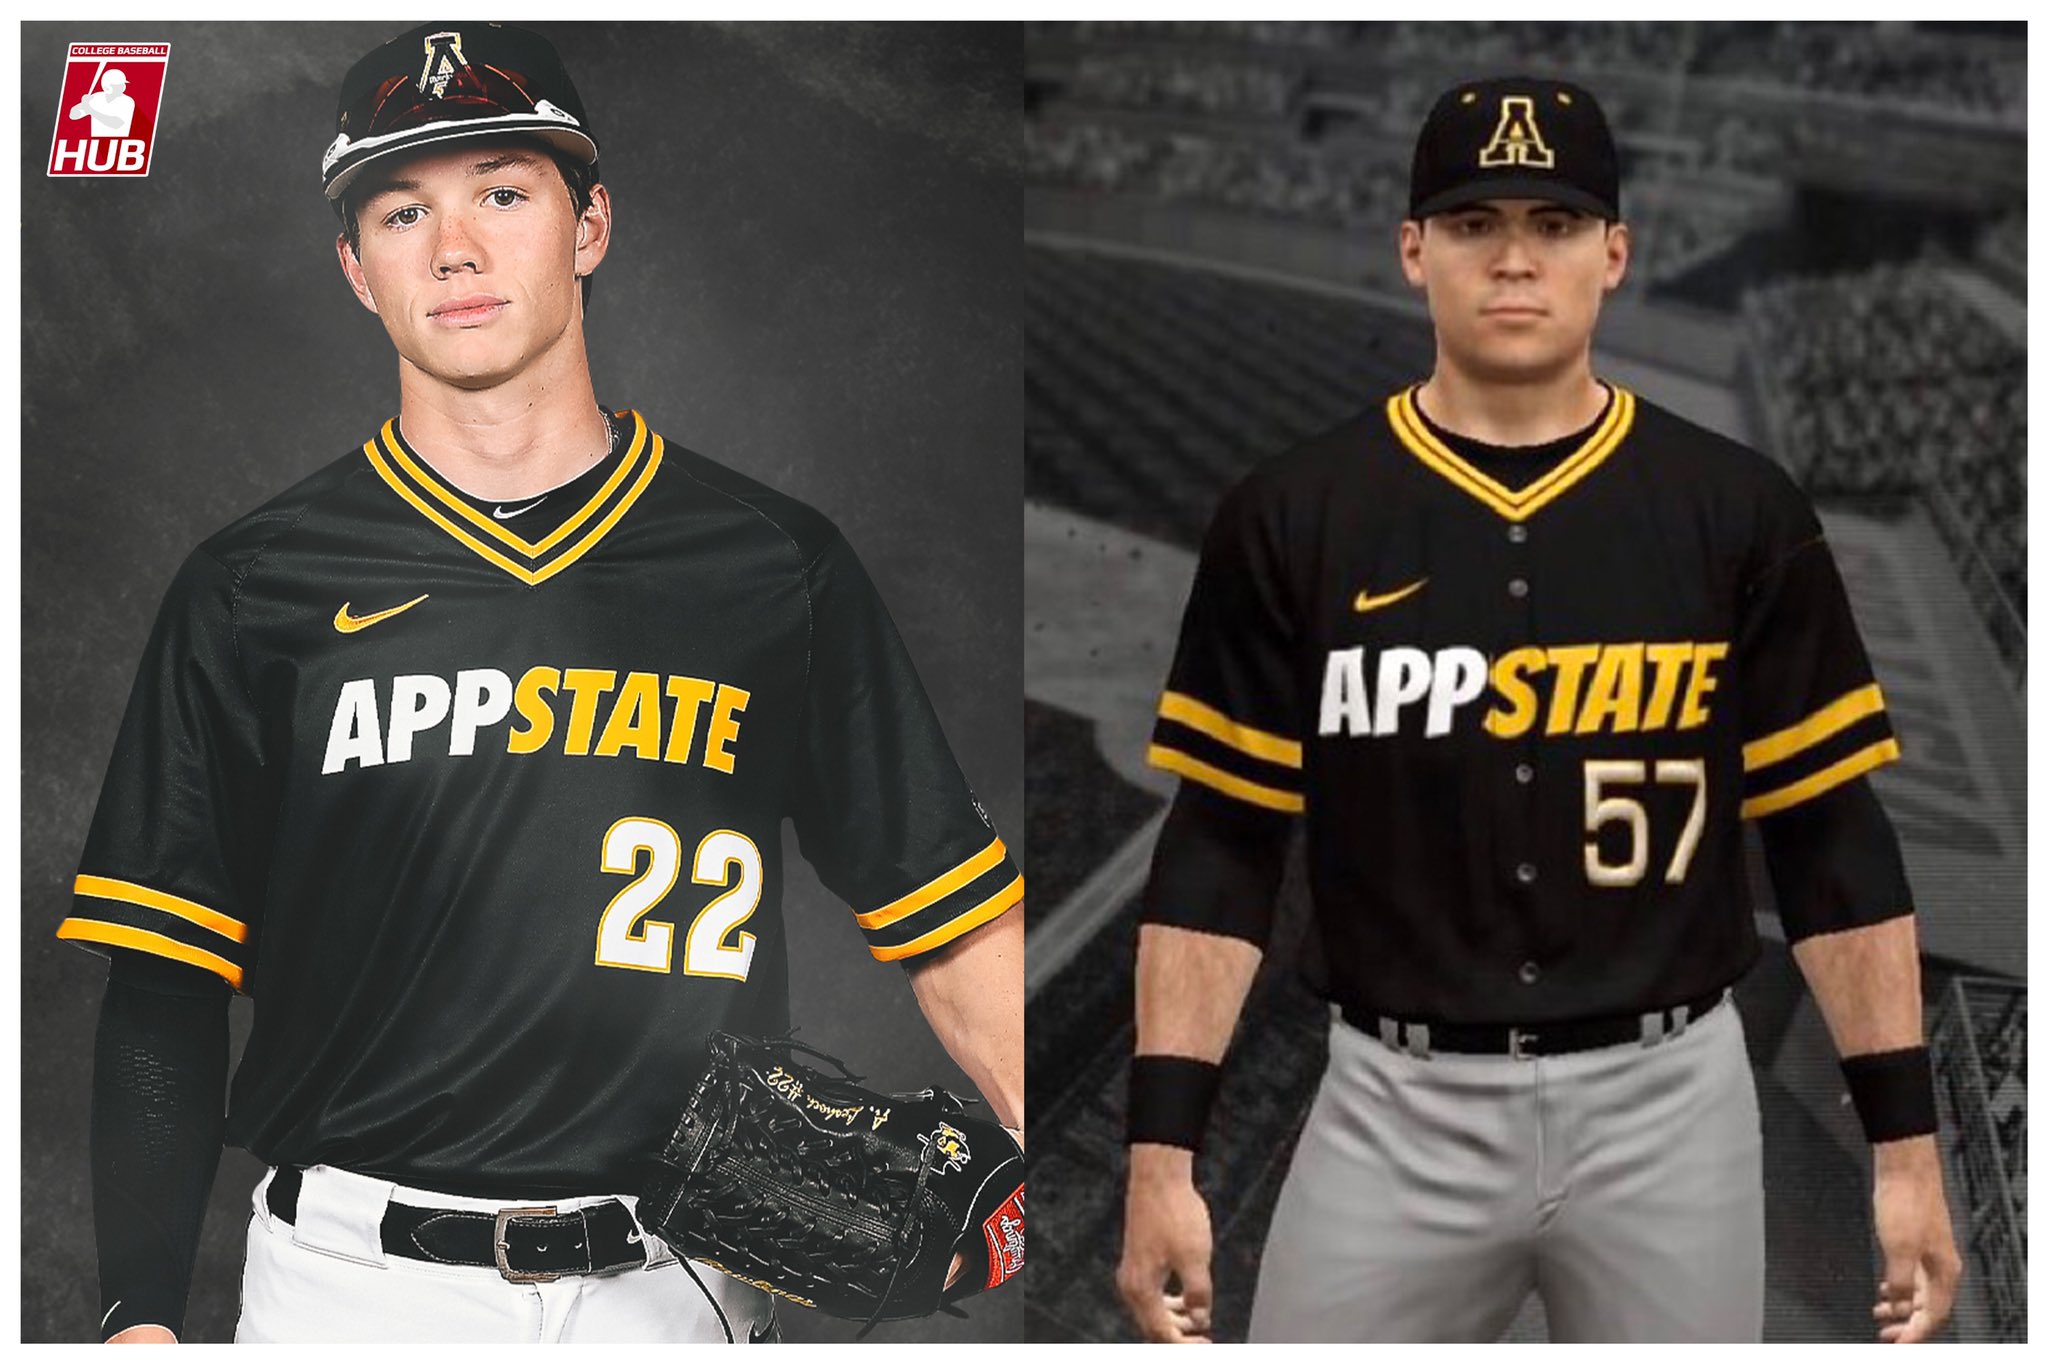 What's your favorite uniform in college baseball? Here's mine :  r/collegebaseball